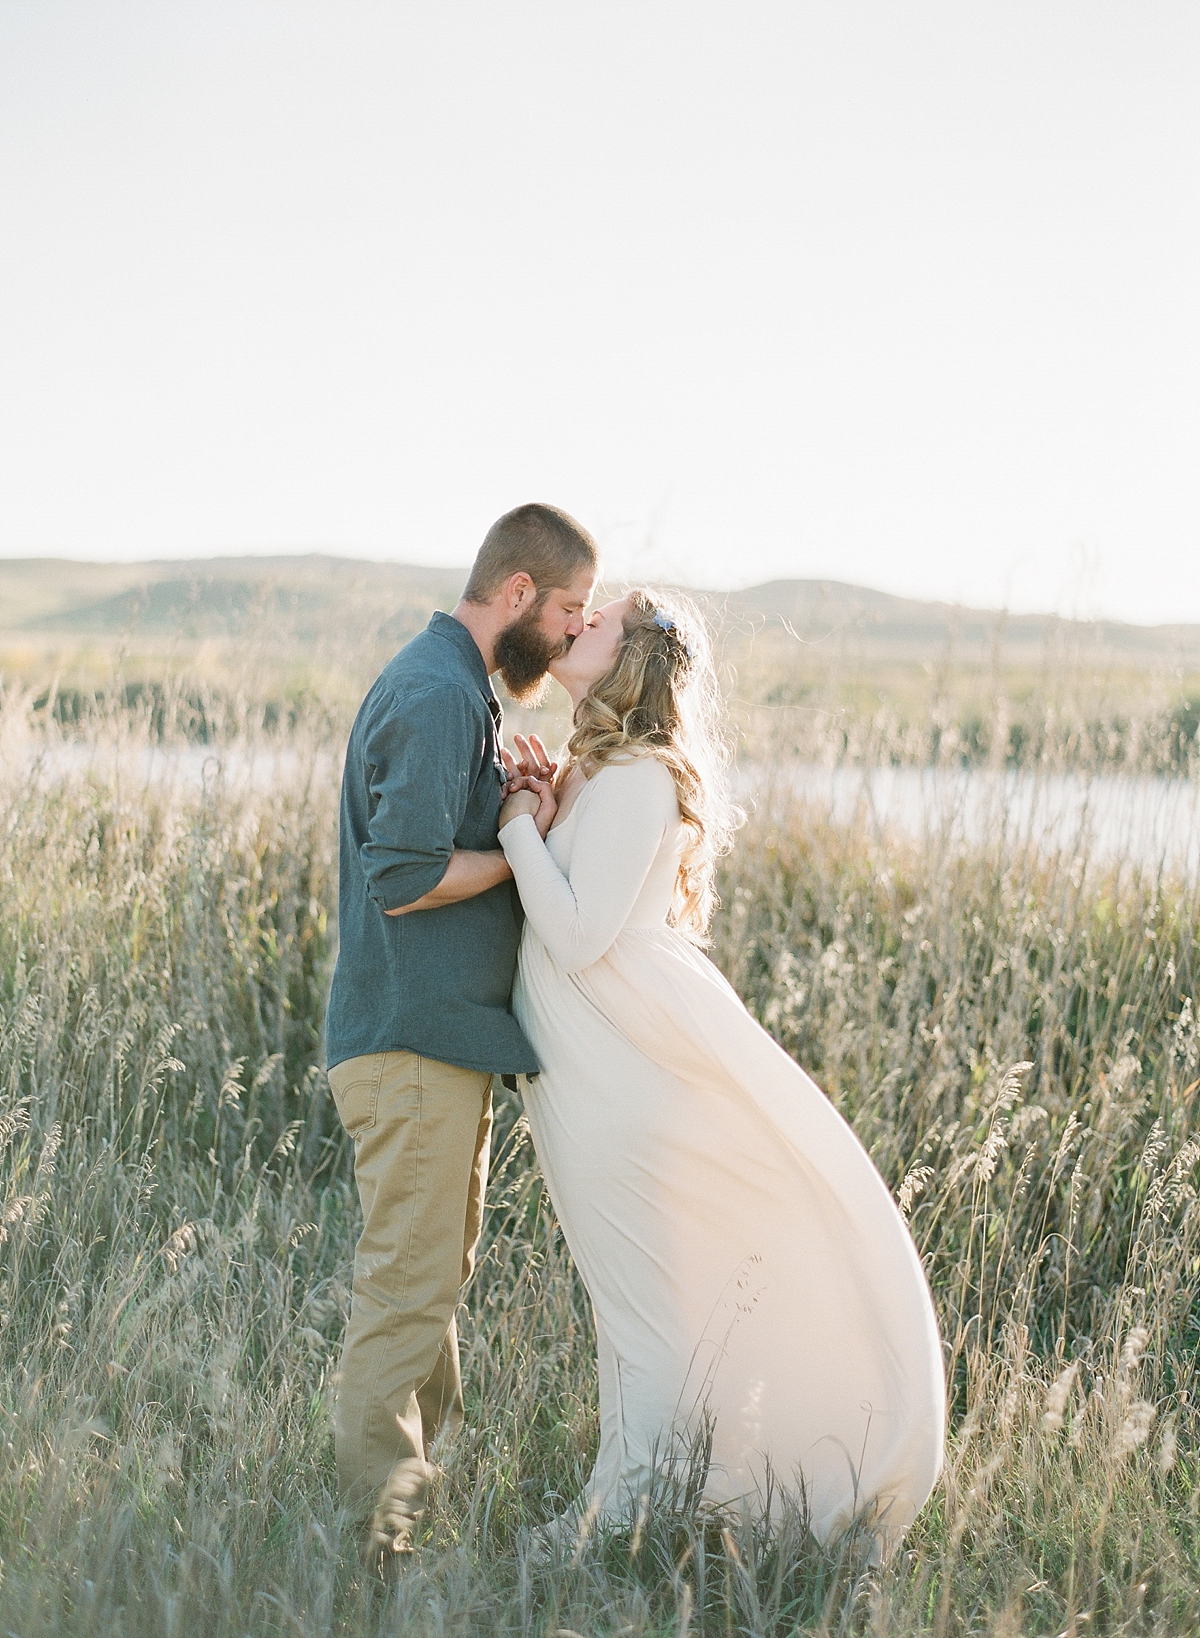 Ethereal minimalist film engagement anniversary photography by Golden Veil Photography North Dakota Midwest